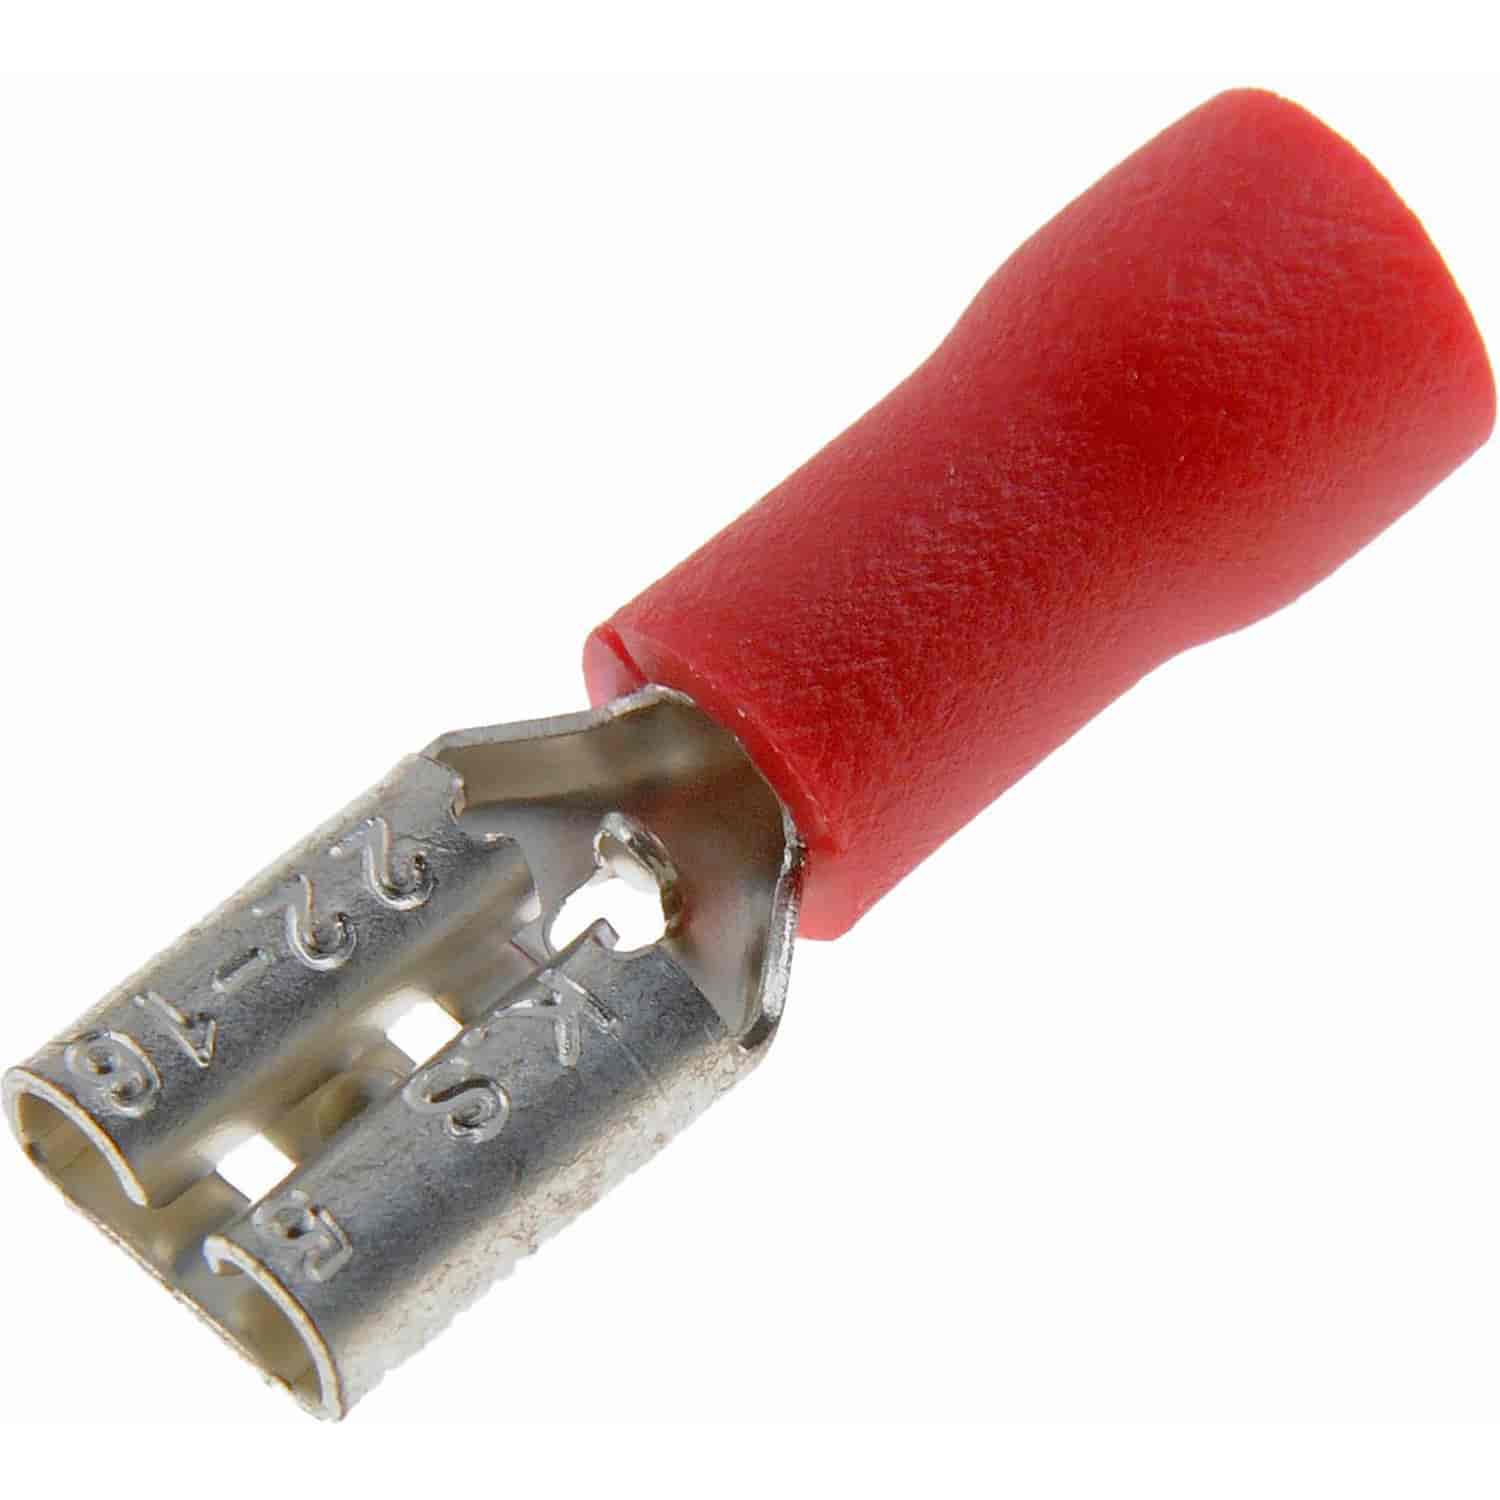 22-18 Gauge Female Disconnect .187 In. Red